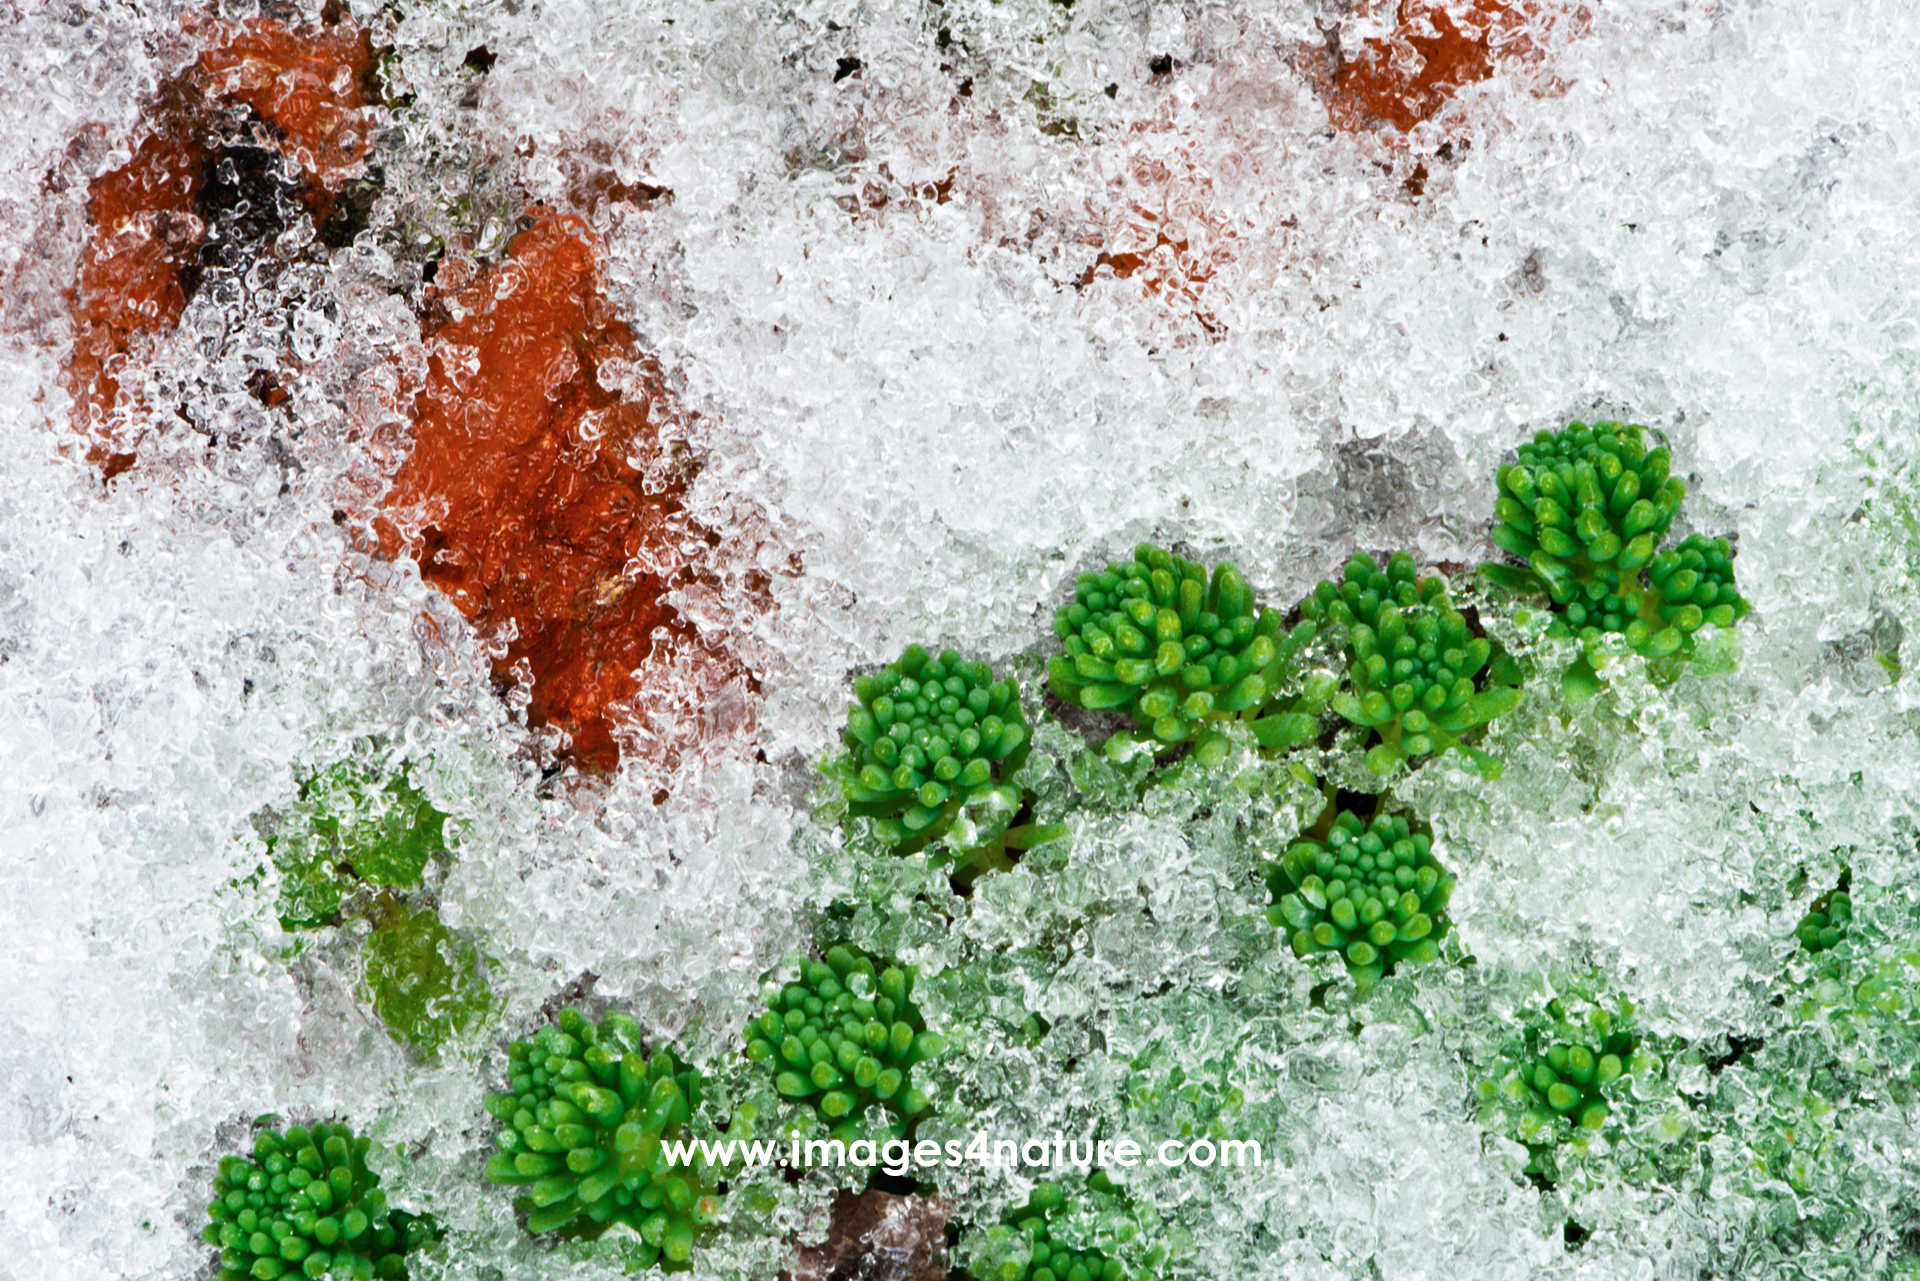 Ice crystals covering red stones and green plants